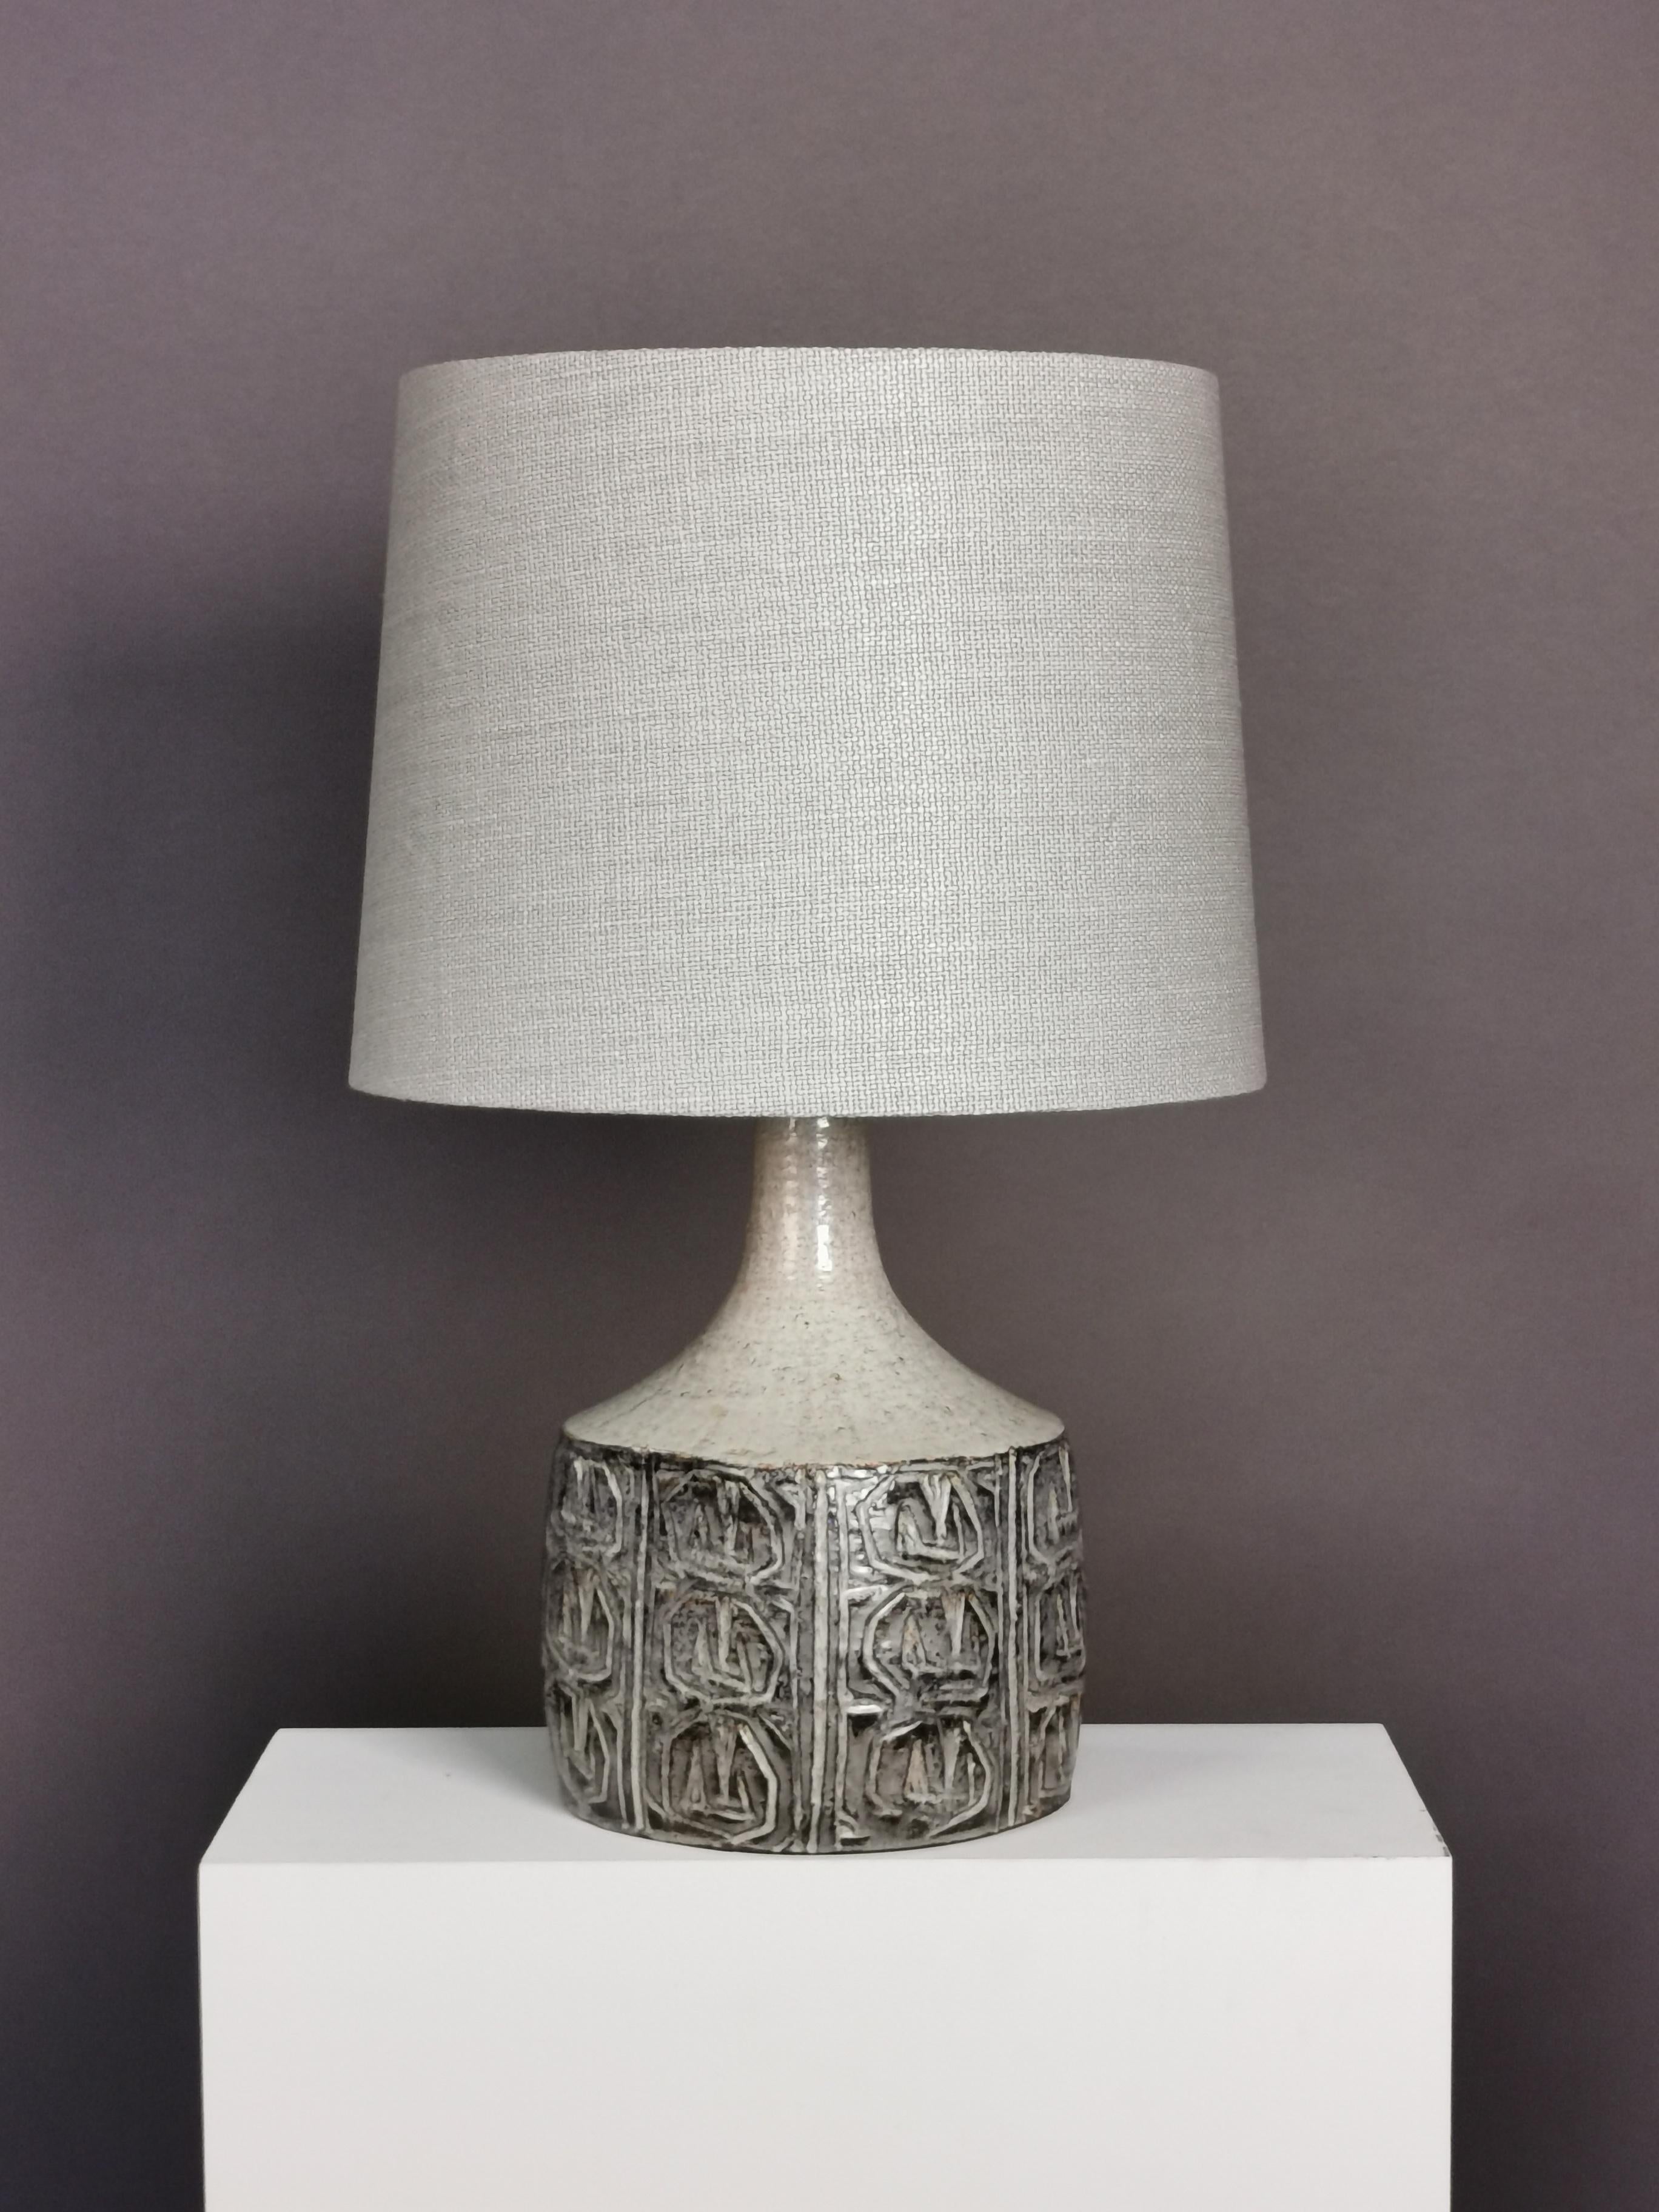 Light grey glazed stoneware table lamp by Danish ceramic artist Jette Hellerøe for Axella.
Manufactured in 1964, new linen shade. Rewired.
The shade diameter is 40cm.
 